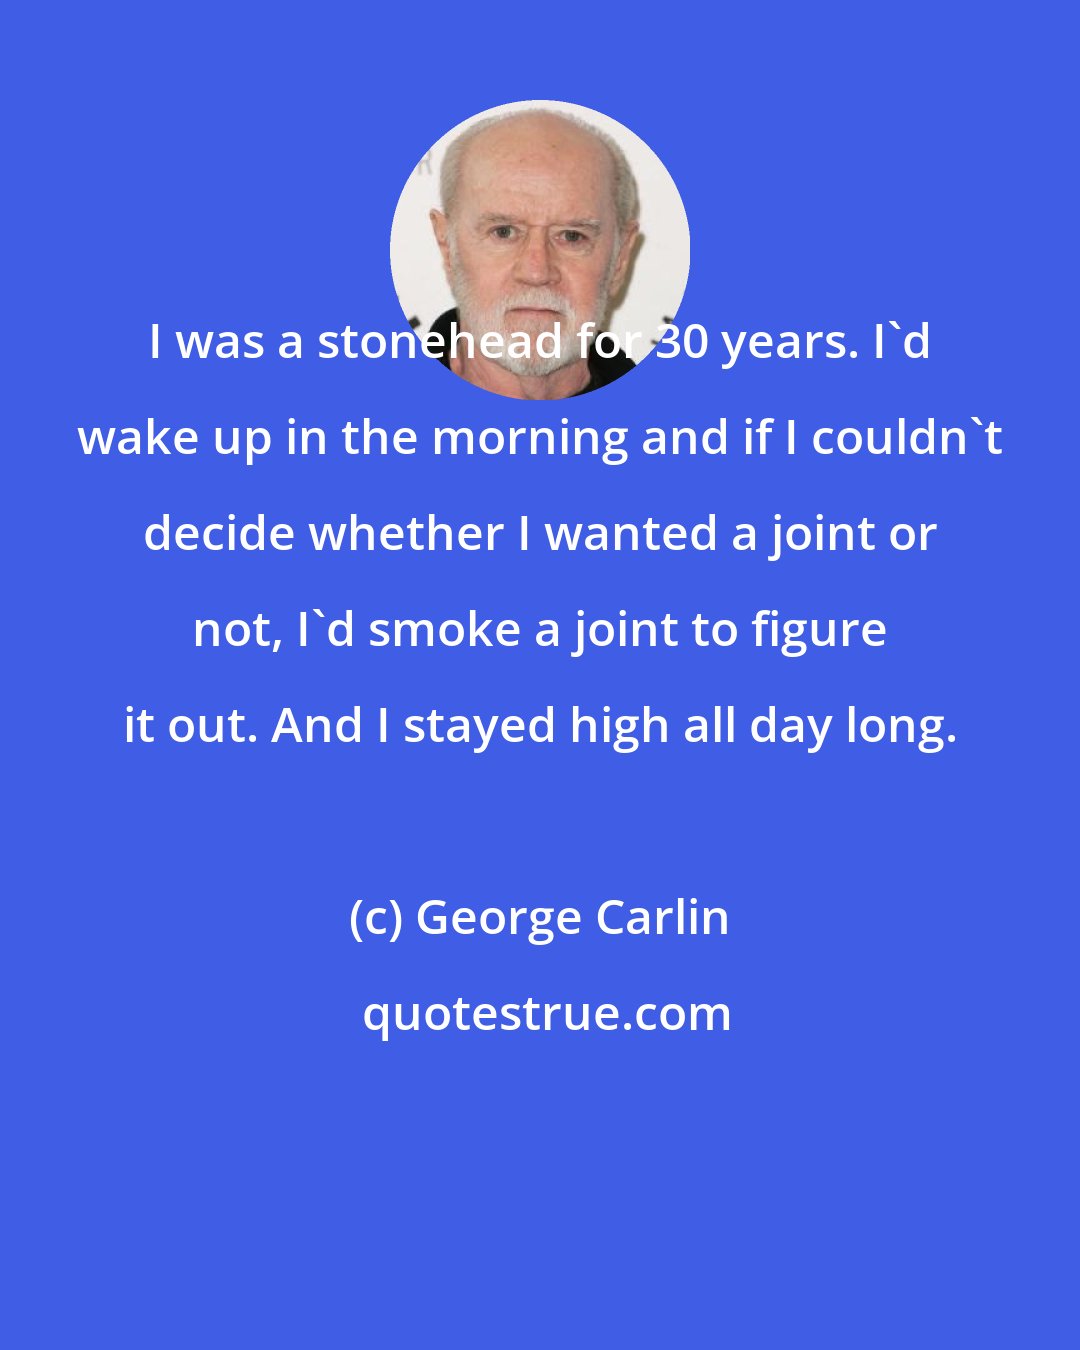 George Carlin: I was a stonehead for 30 years. I'd wake up in the morning and if I couldn't decide whether I wanted a joint or not, I'd smoke a joint to figure it out. And I stayed high all day long.